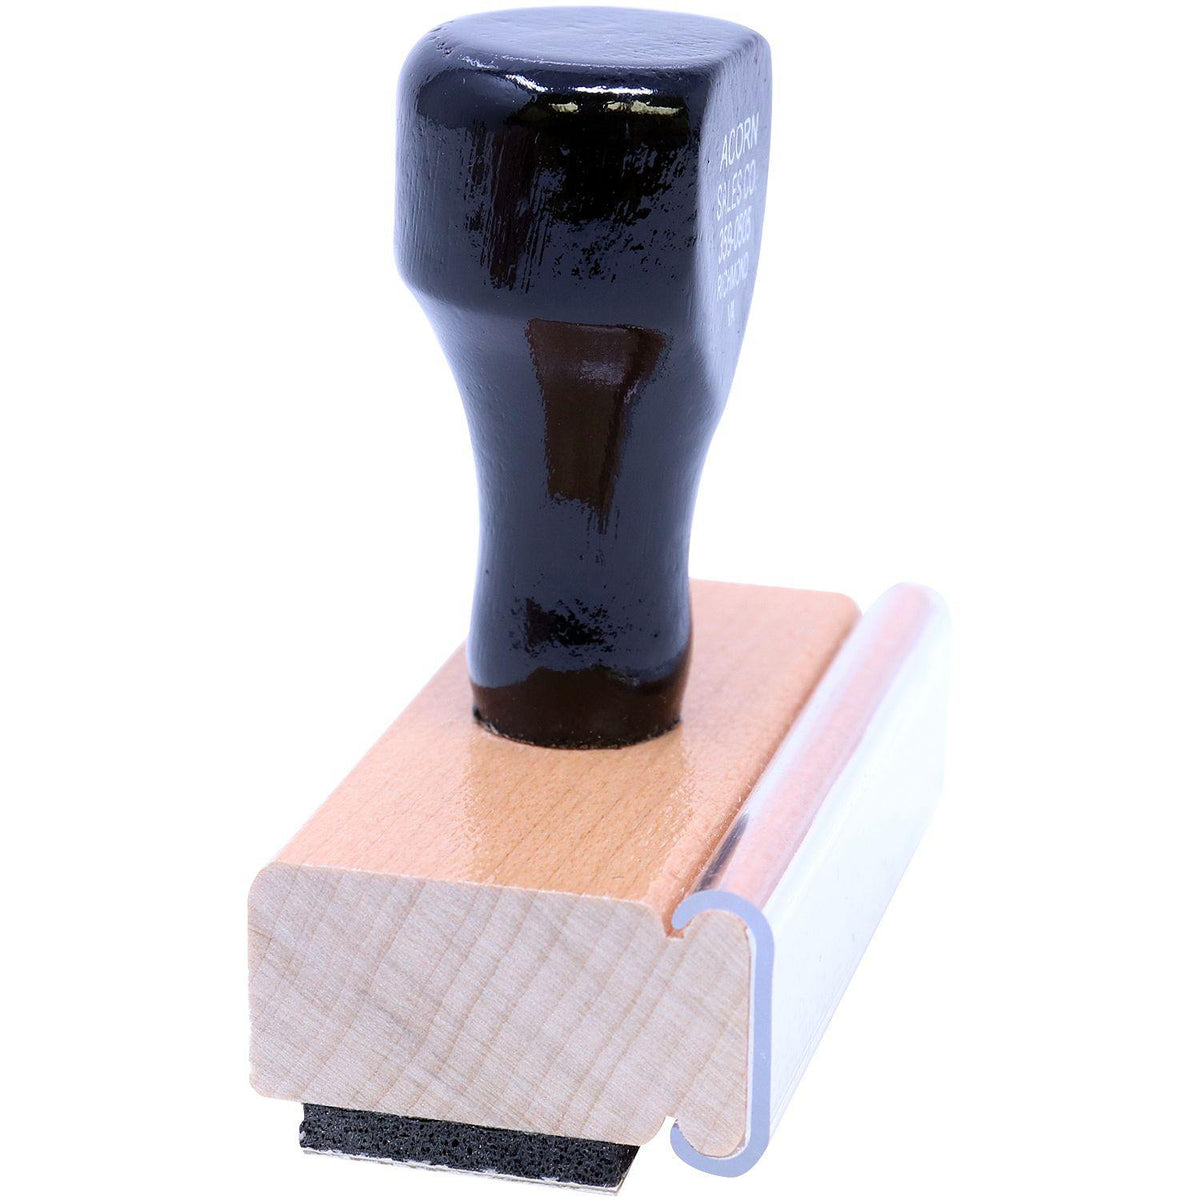 Side View of Large Priority Mail International Rubber Stamp at an Angle